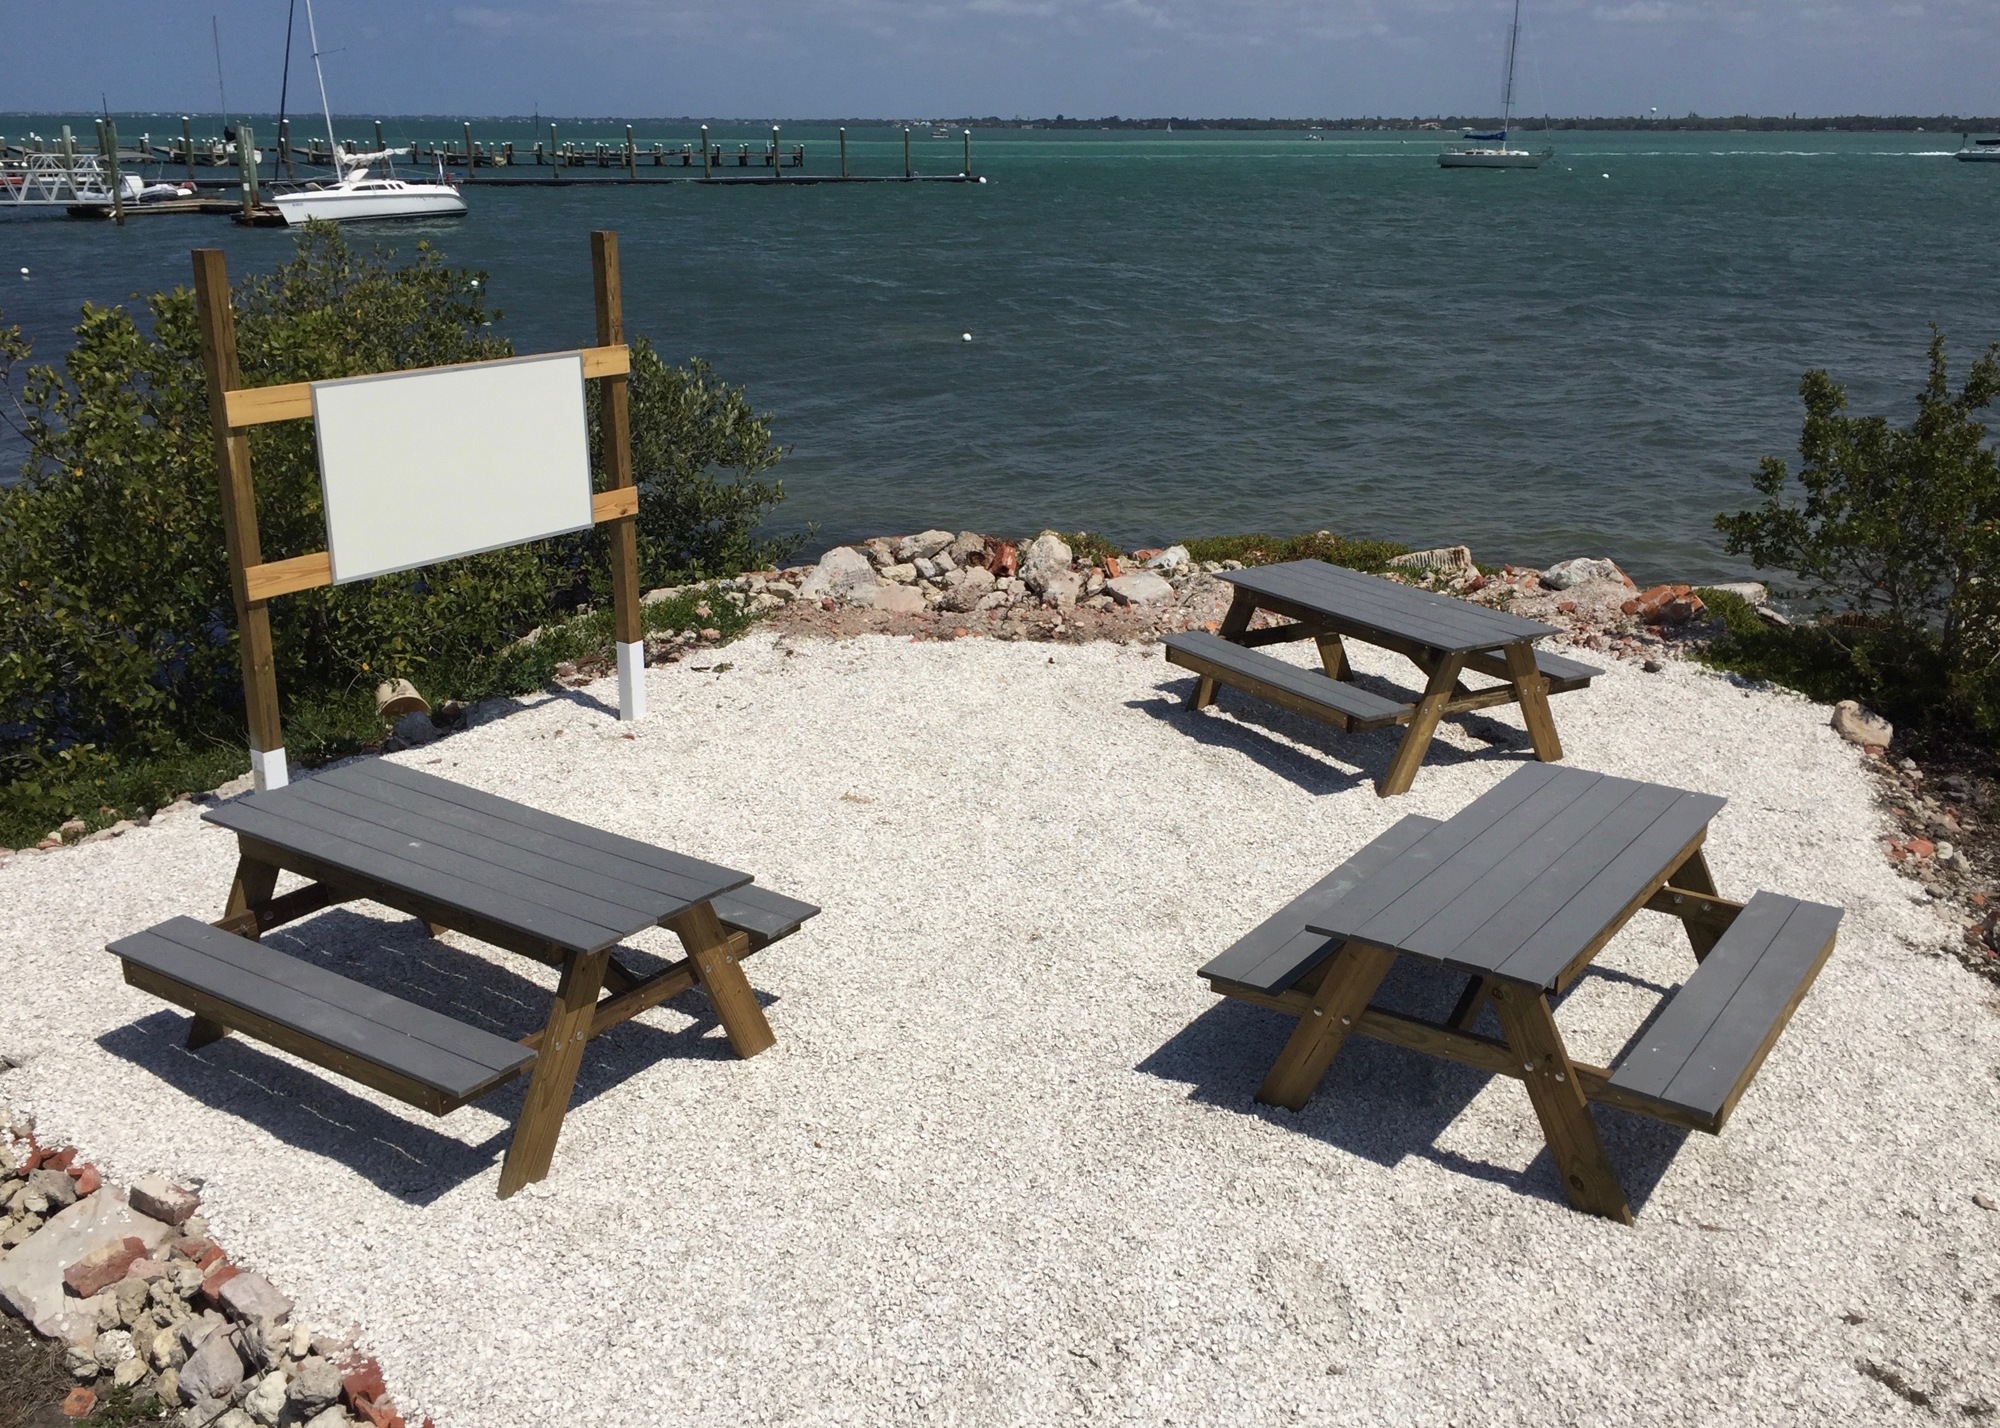 For a project, Mason turned this spot at the Sarasota Sailing Squadron into a classroom for the youth sailing program. Courtesy photo.